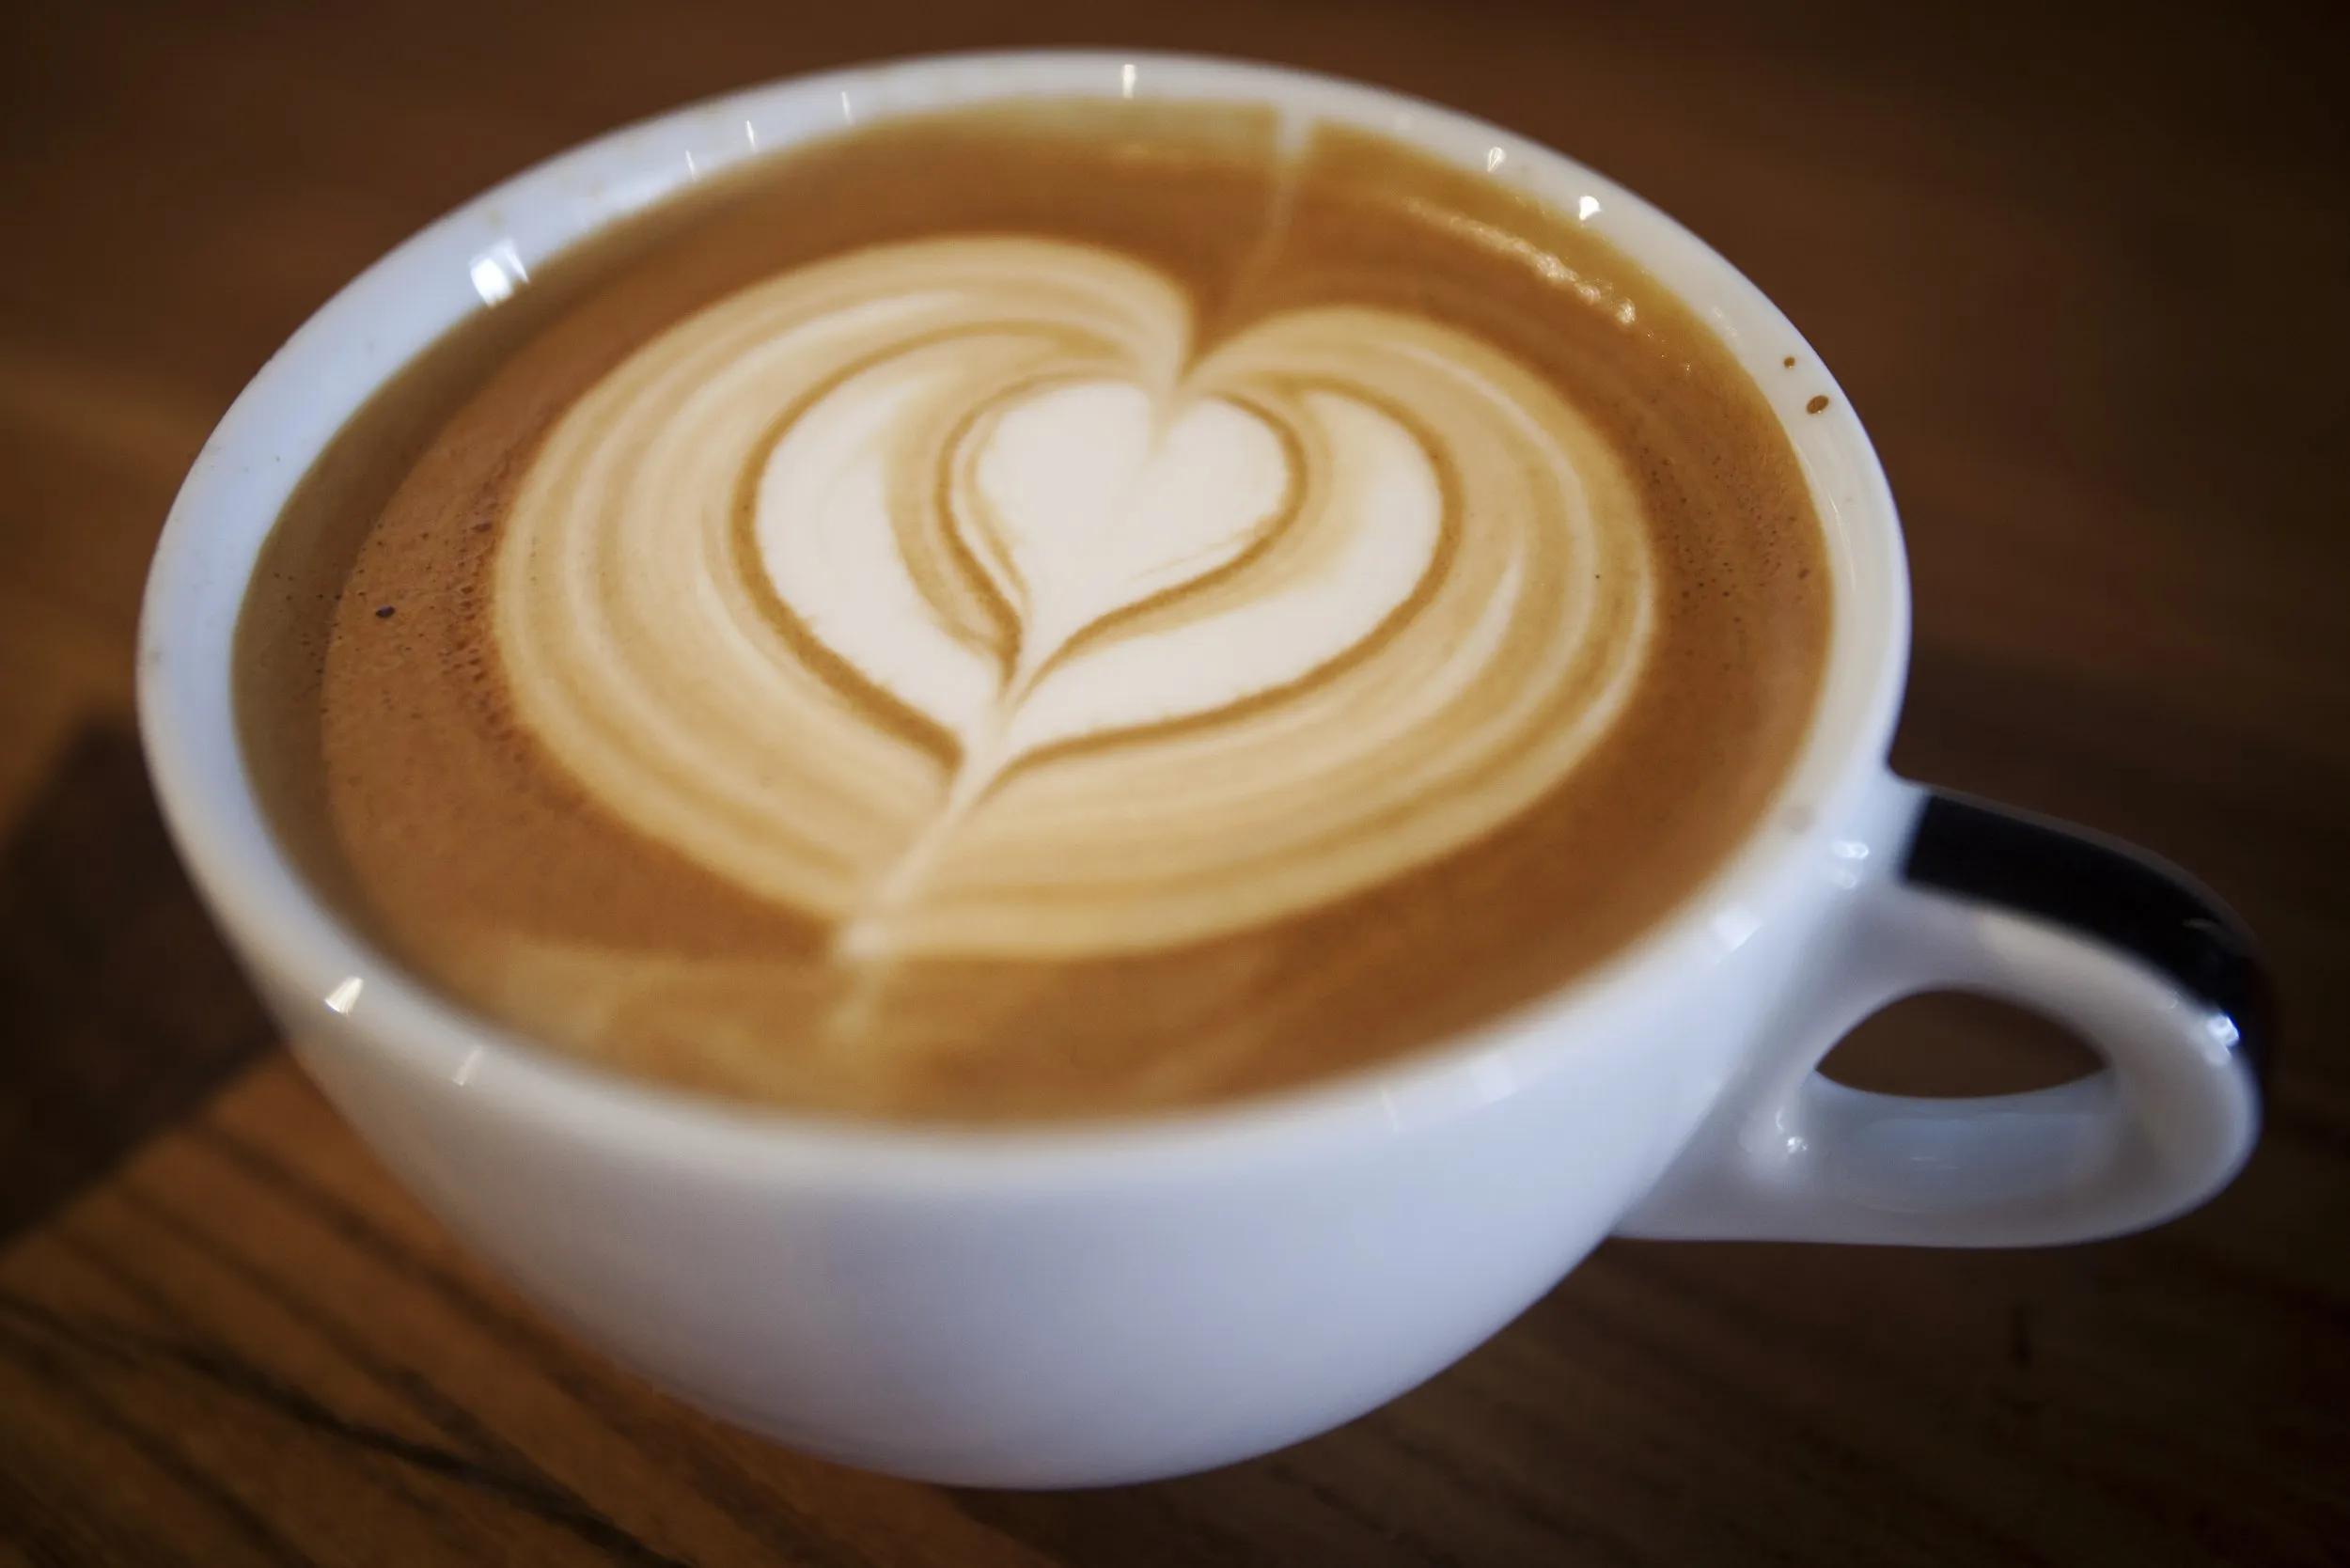 Drinking Three Cups of Coffee a Day Reduces Risk of Heart Attacks